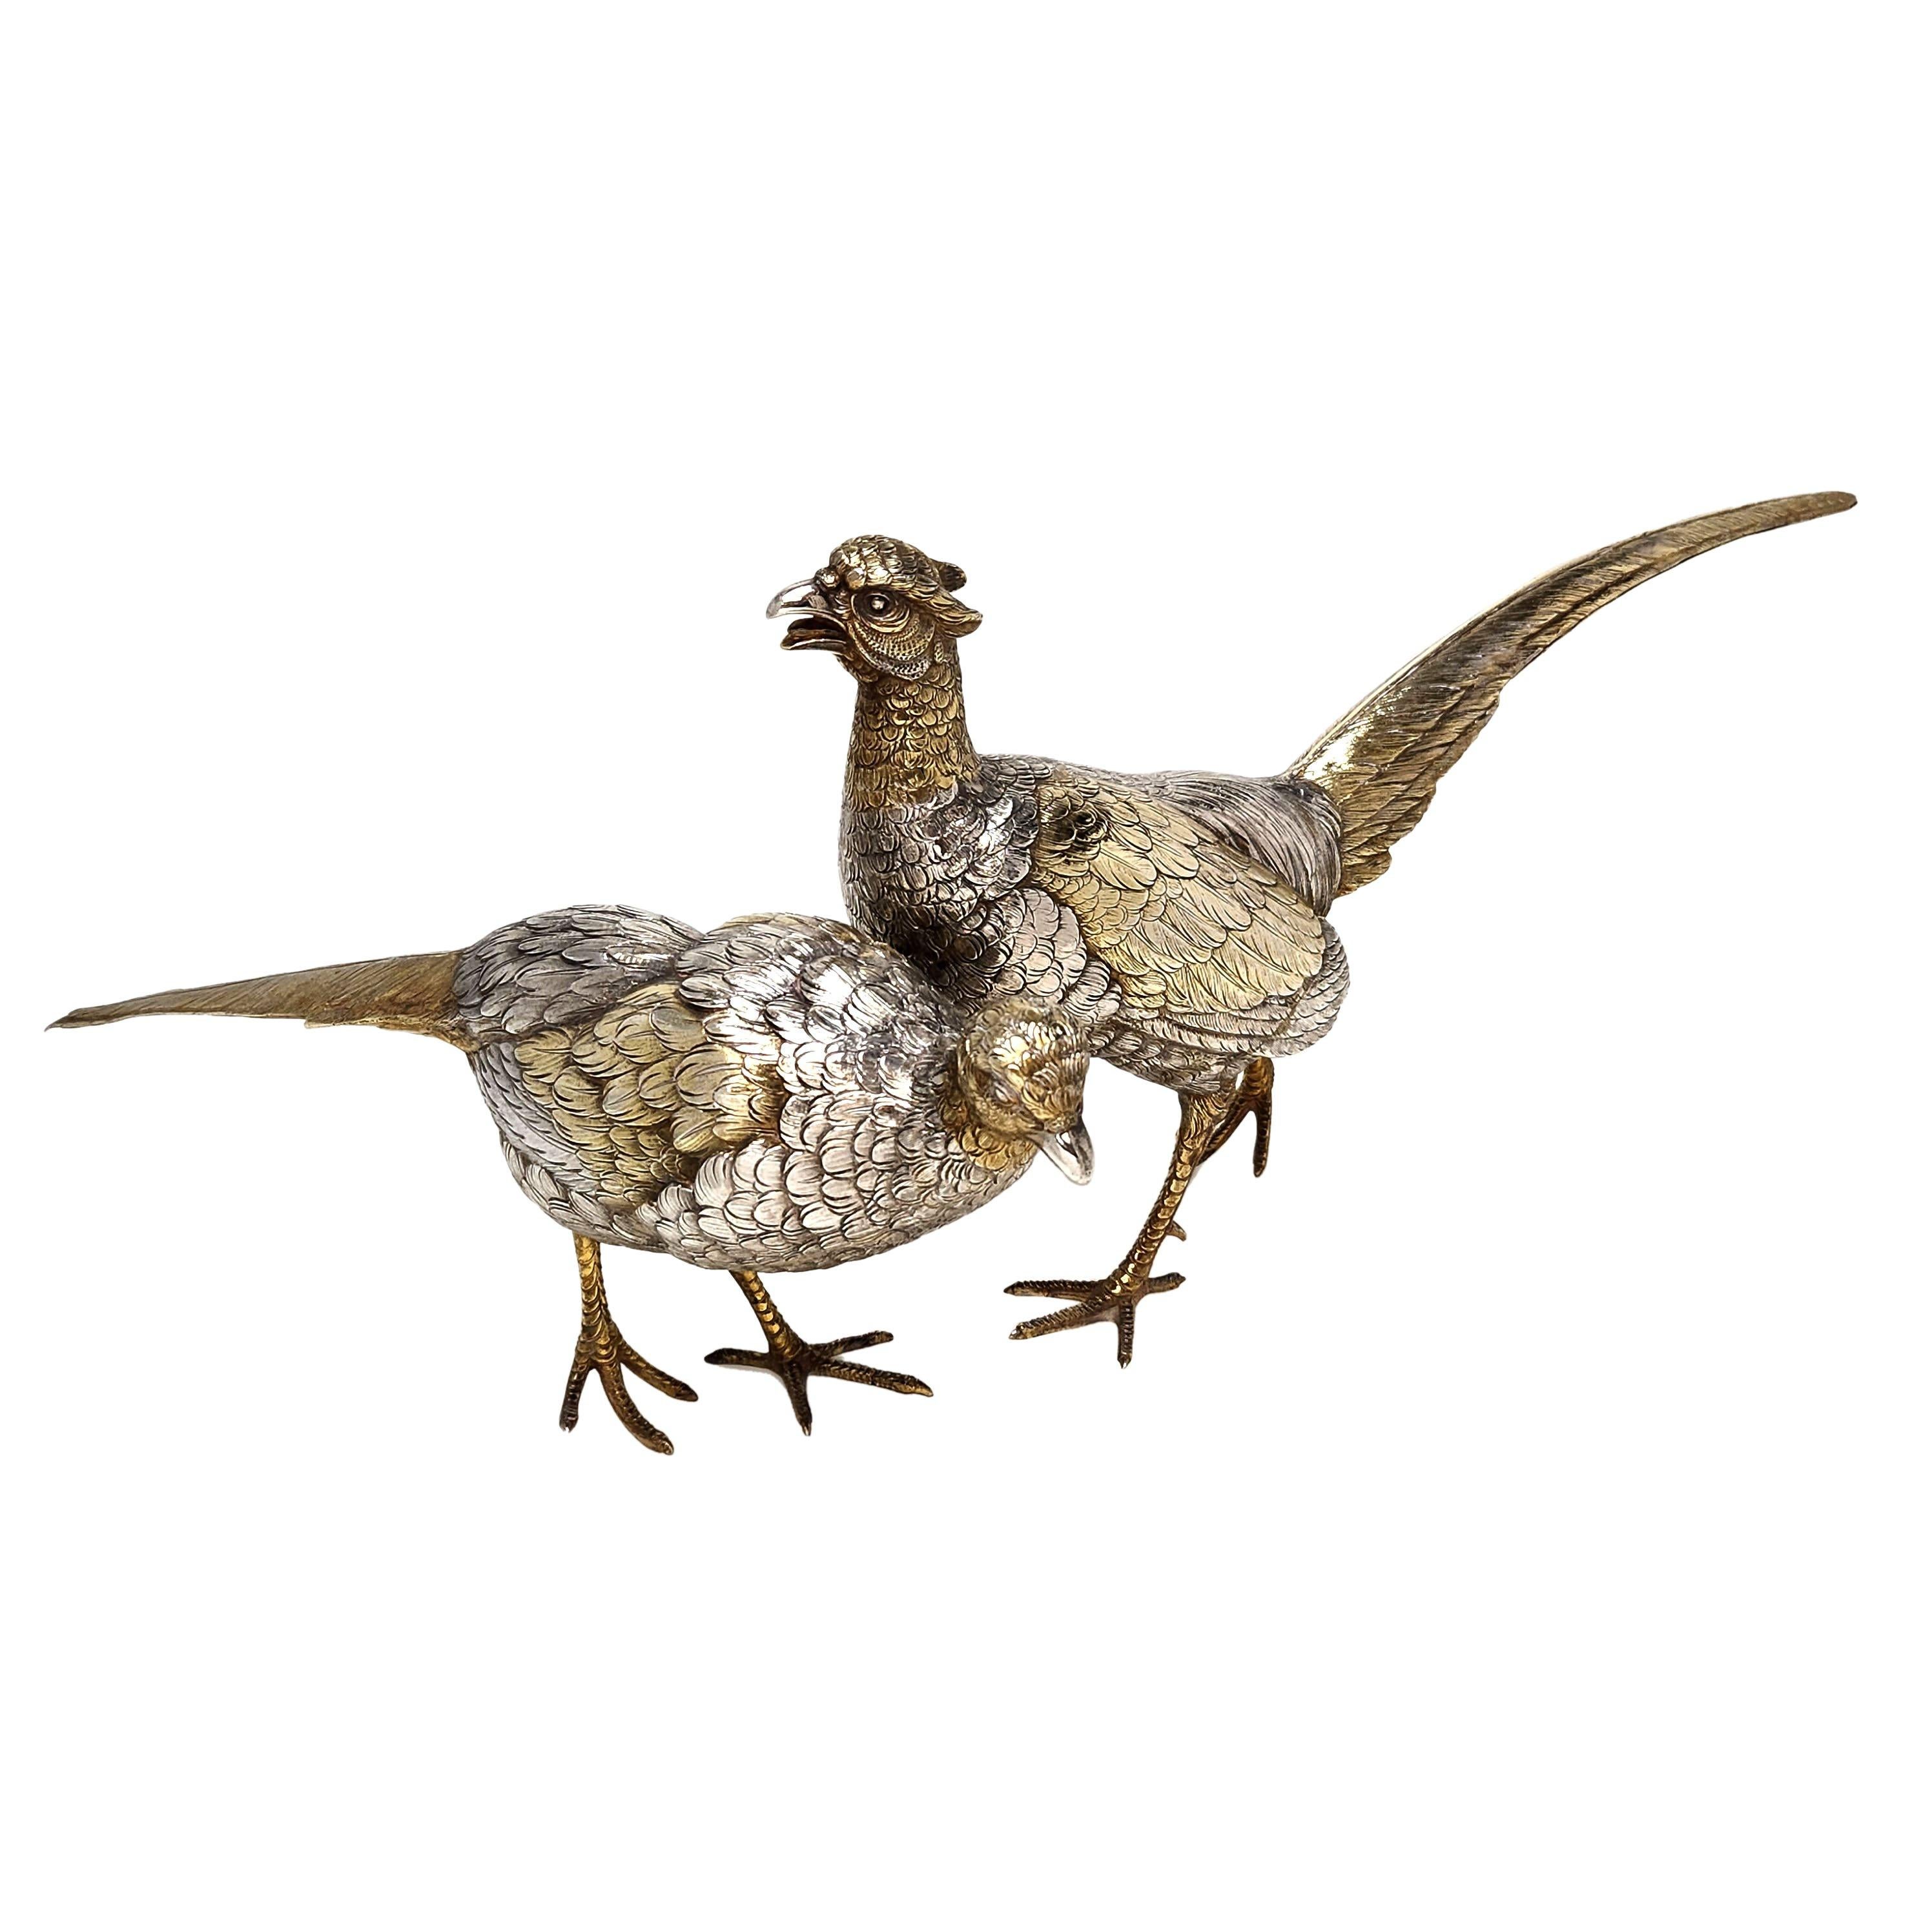 A pair of magnificent Antique sterling silver model Pheasants modelled with a great attention to detail. The Birds are each parcel gilt to add a level of visual interest.

Continental silver made in c. 1920.

Approx. Total Weight - 1392g /